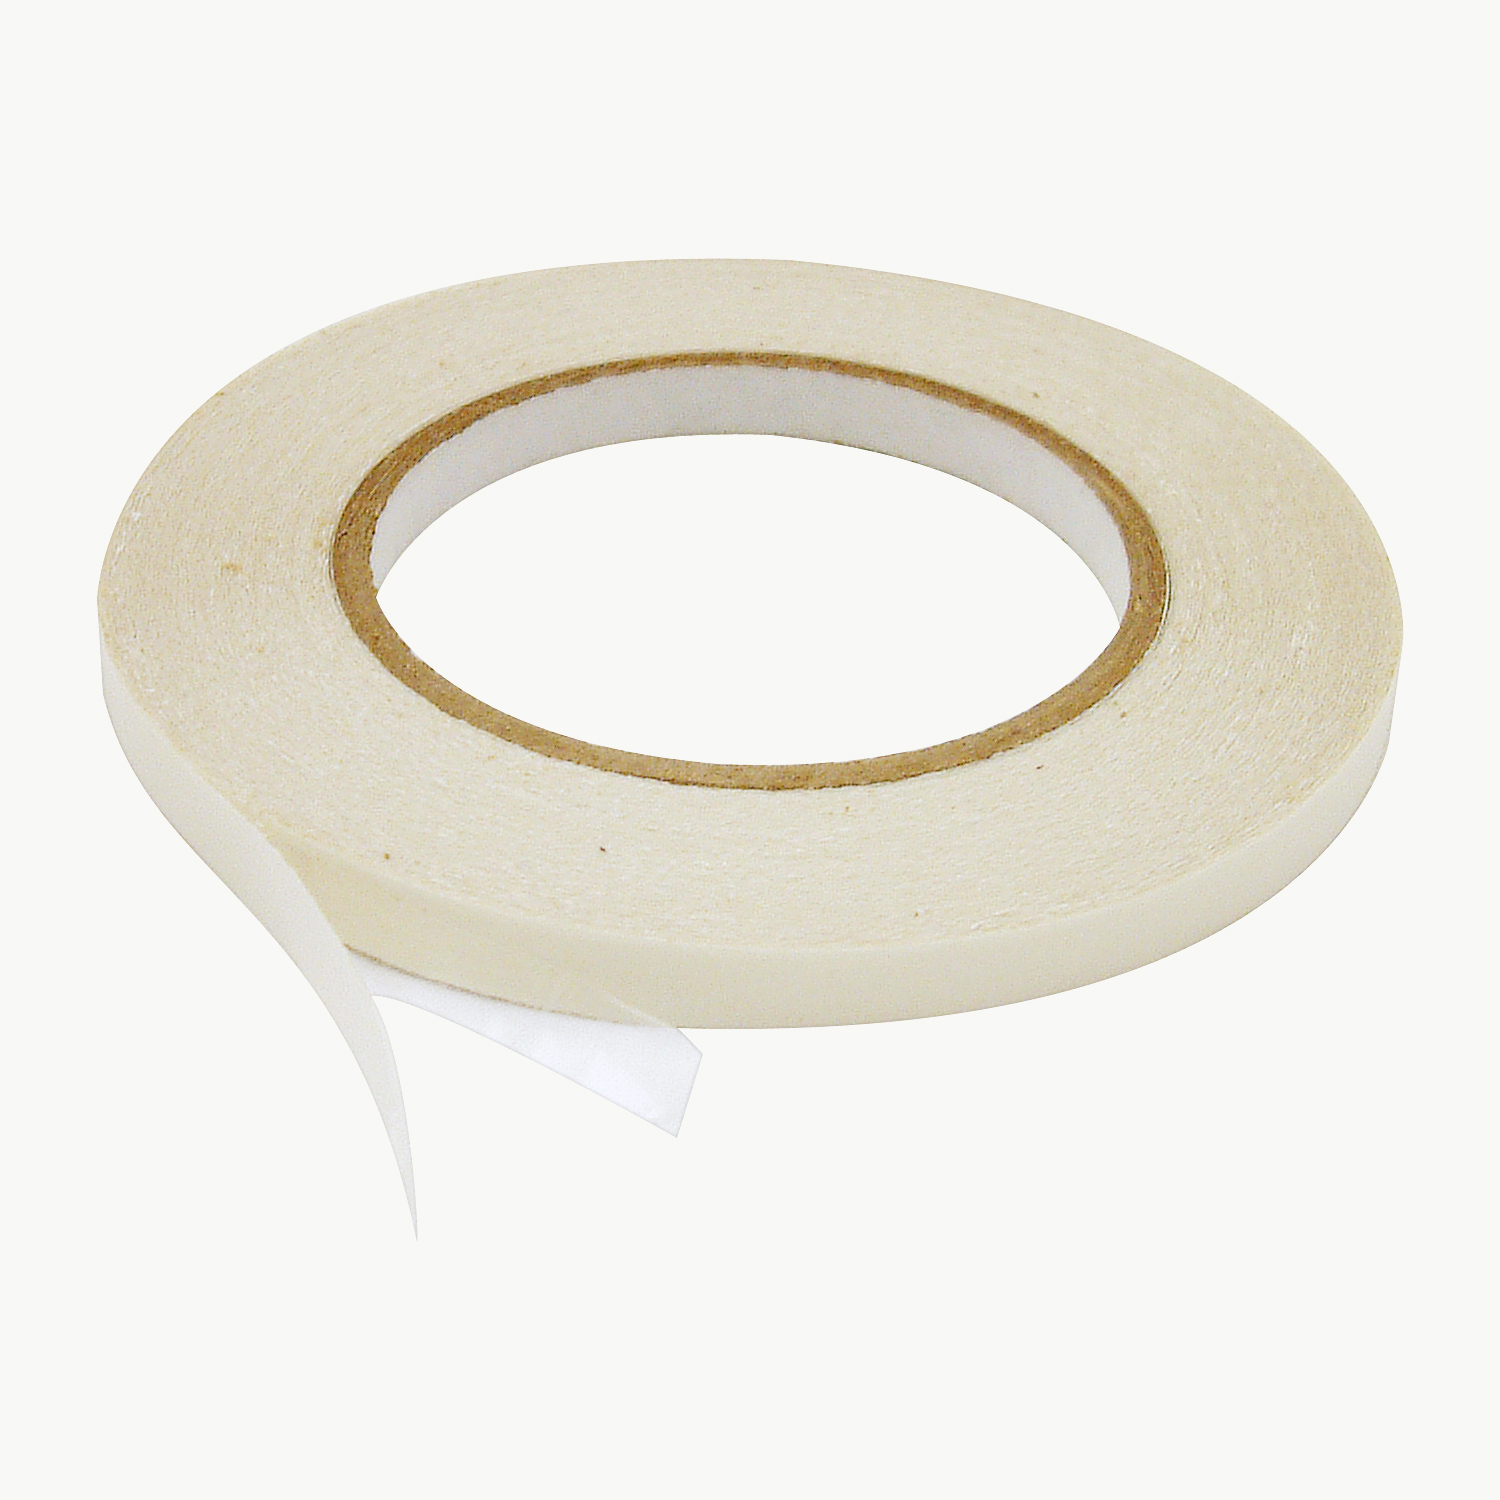 JVCC Double-Sided Film Tape [Acrylic Adhesive] (DC-4199CS)